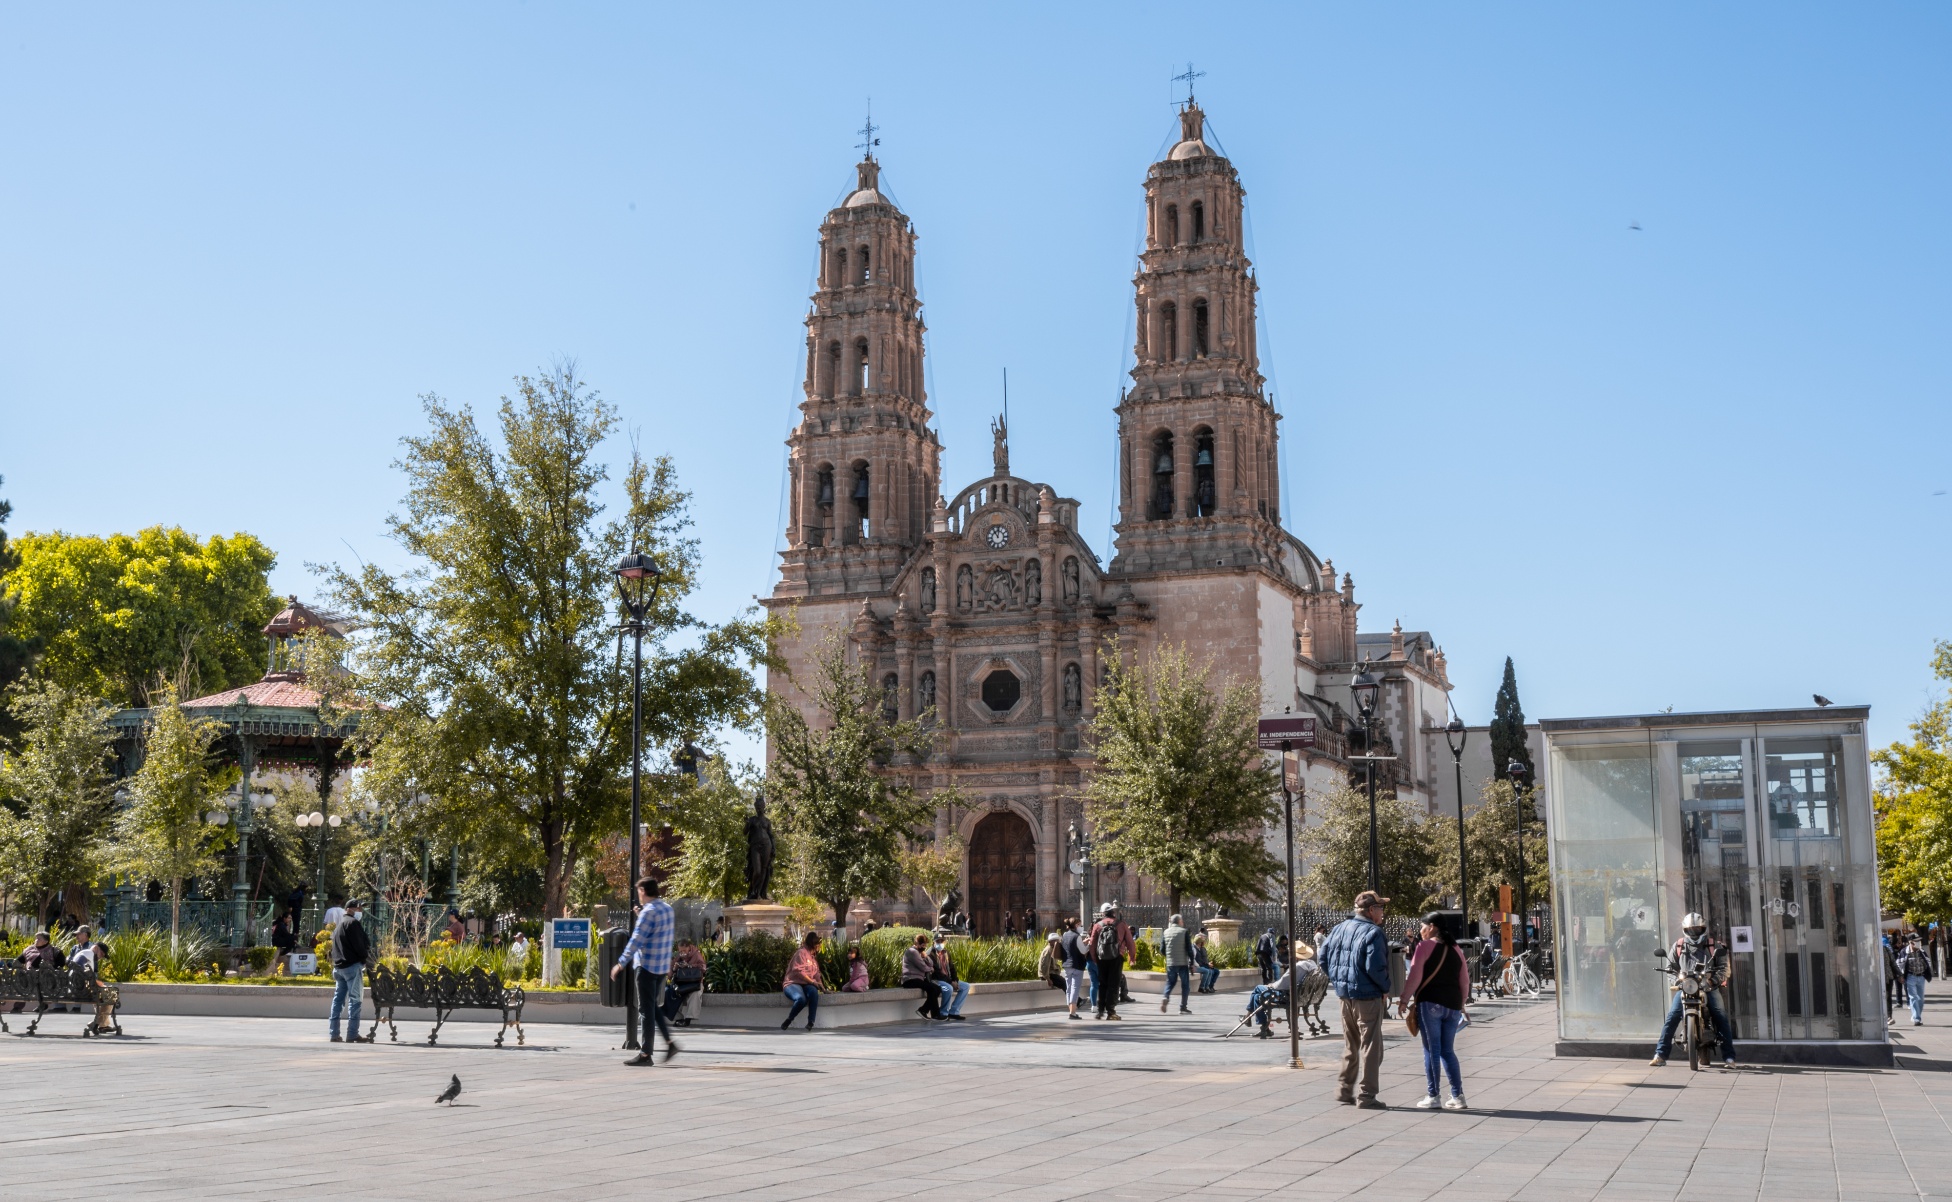 Metropolitan Cathedral of Chihuahua